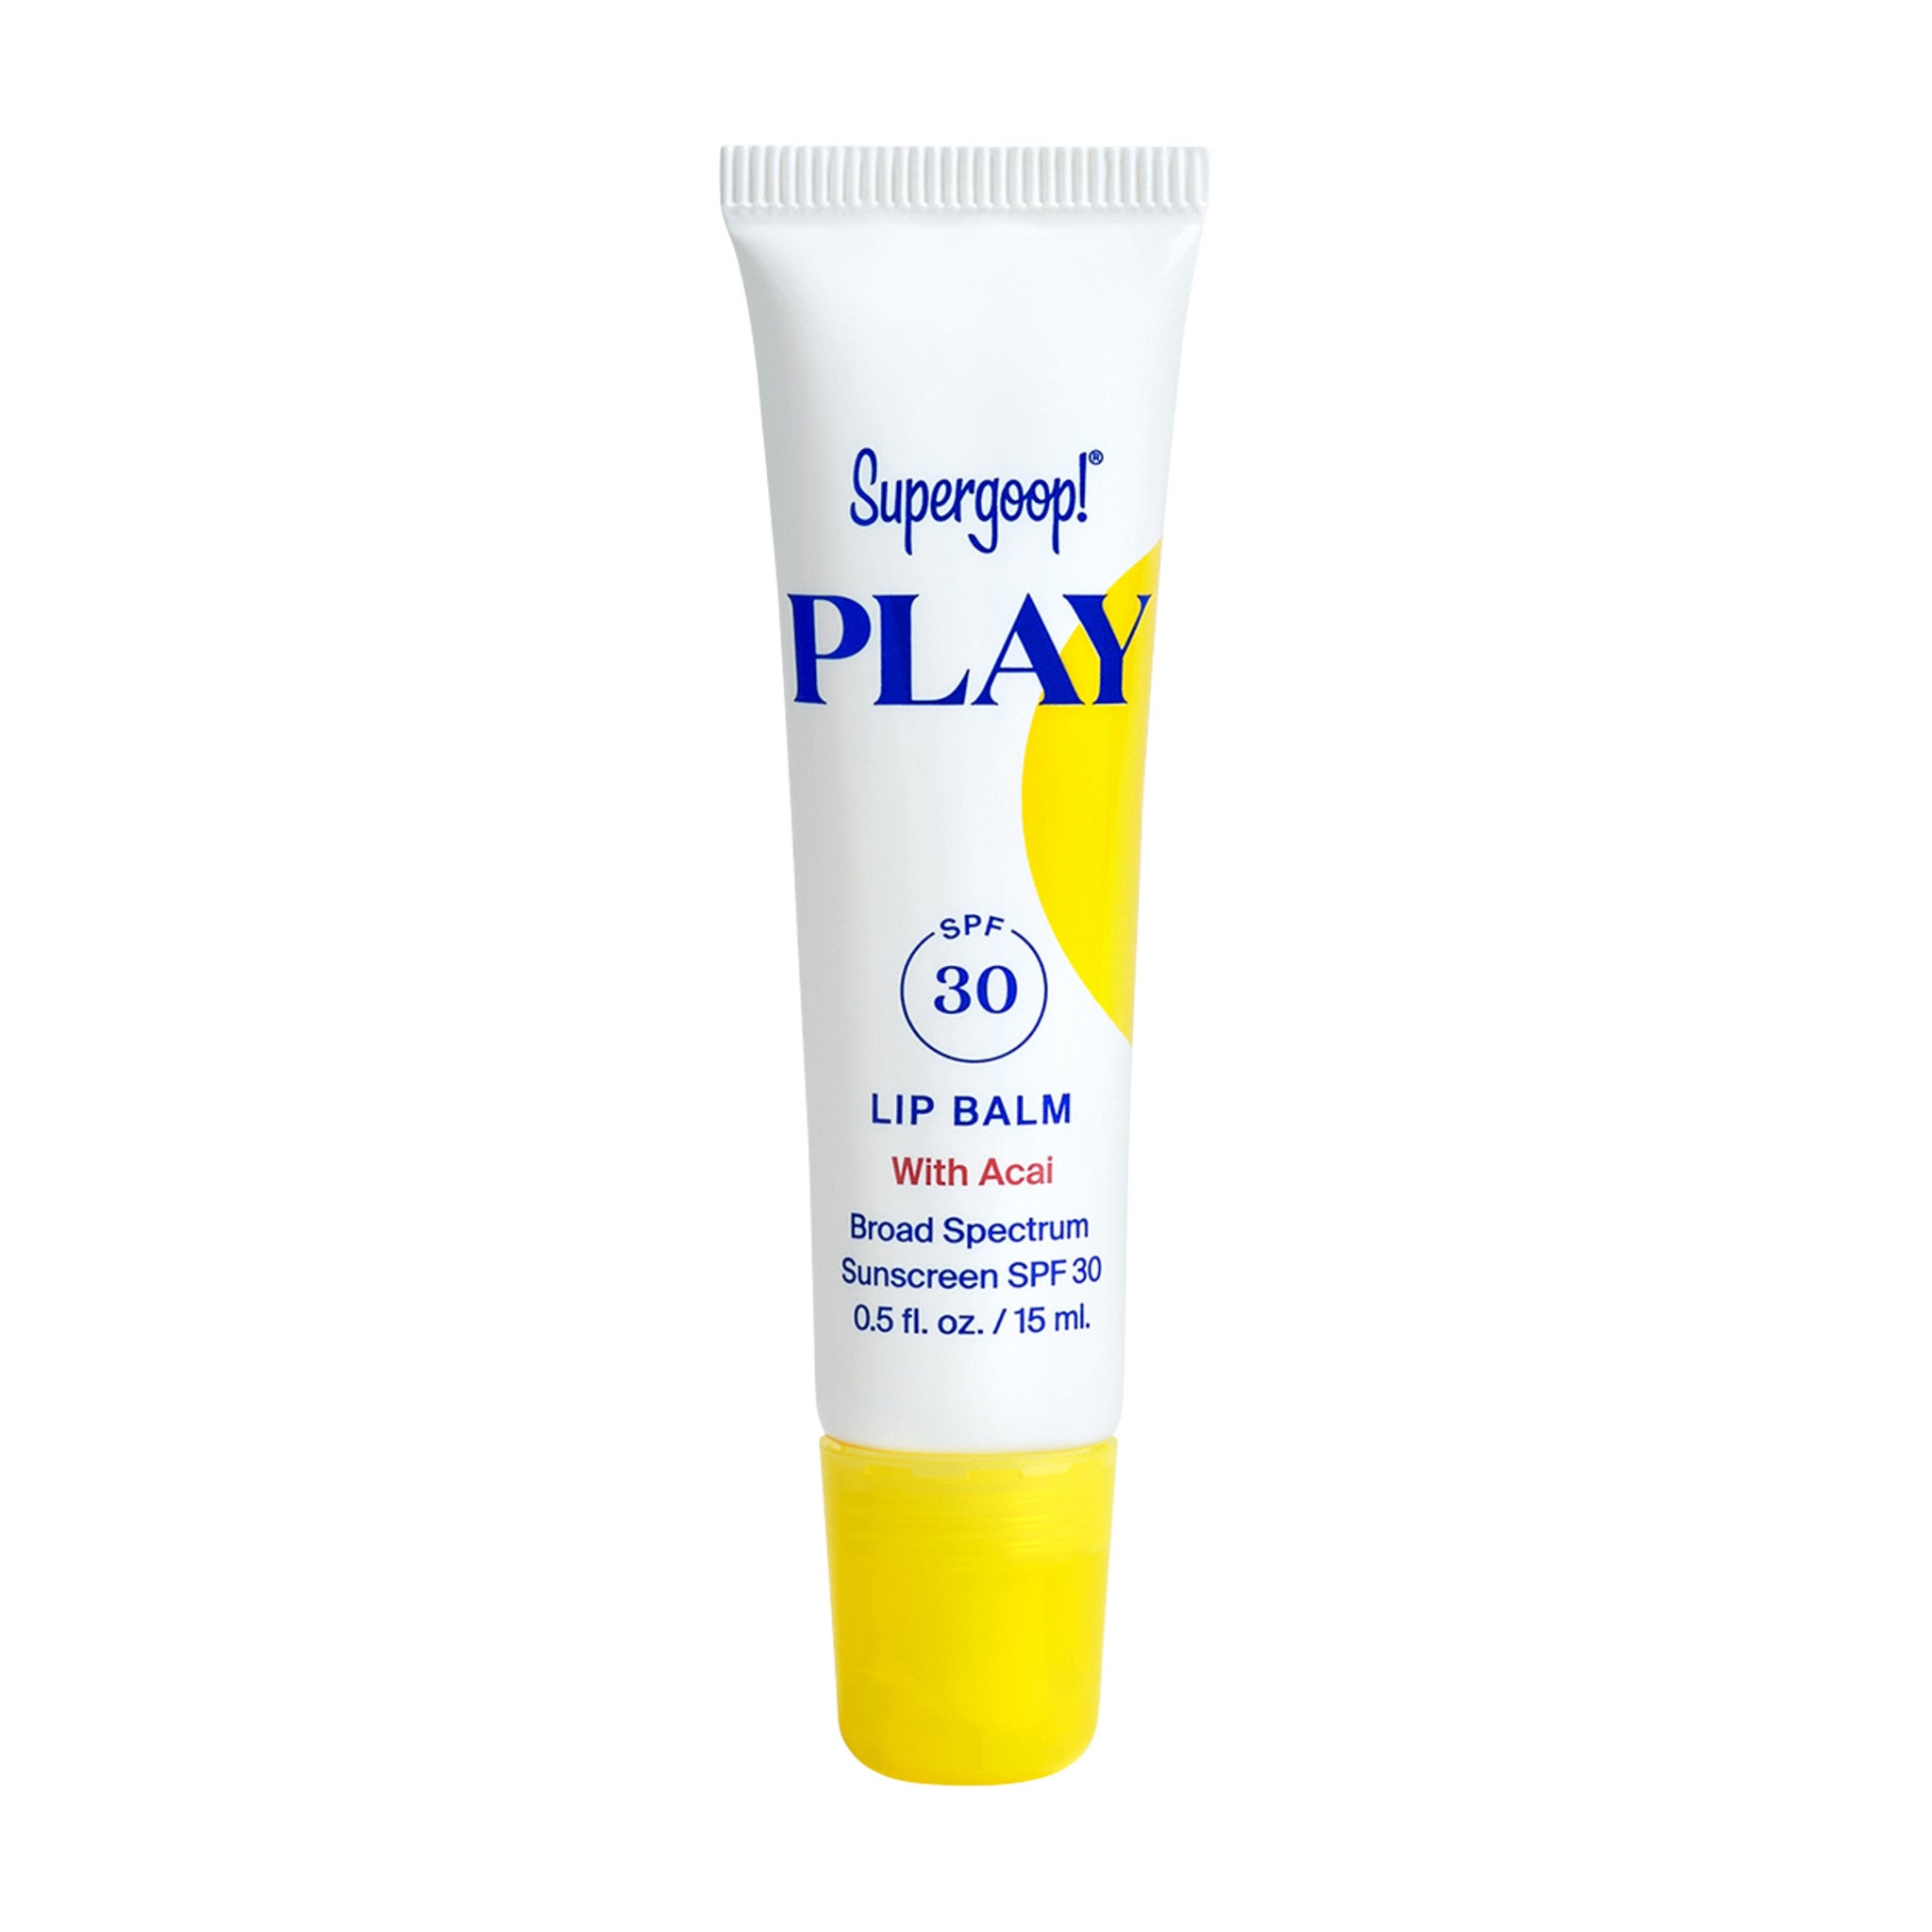 Supergoop! Play Lip Balm With Acai SPF 30 main image. This product is in the color clear